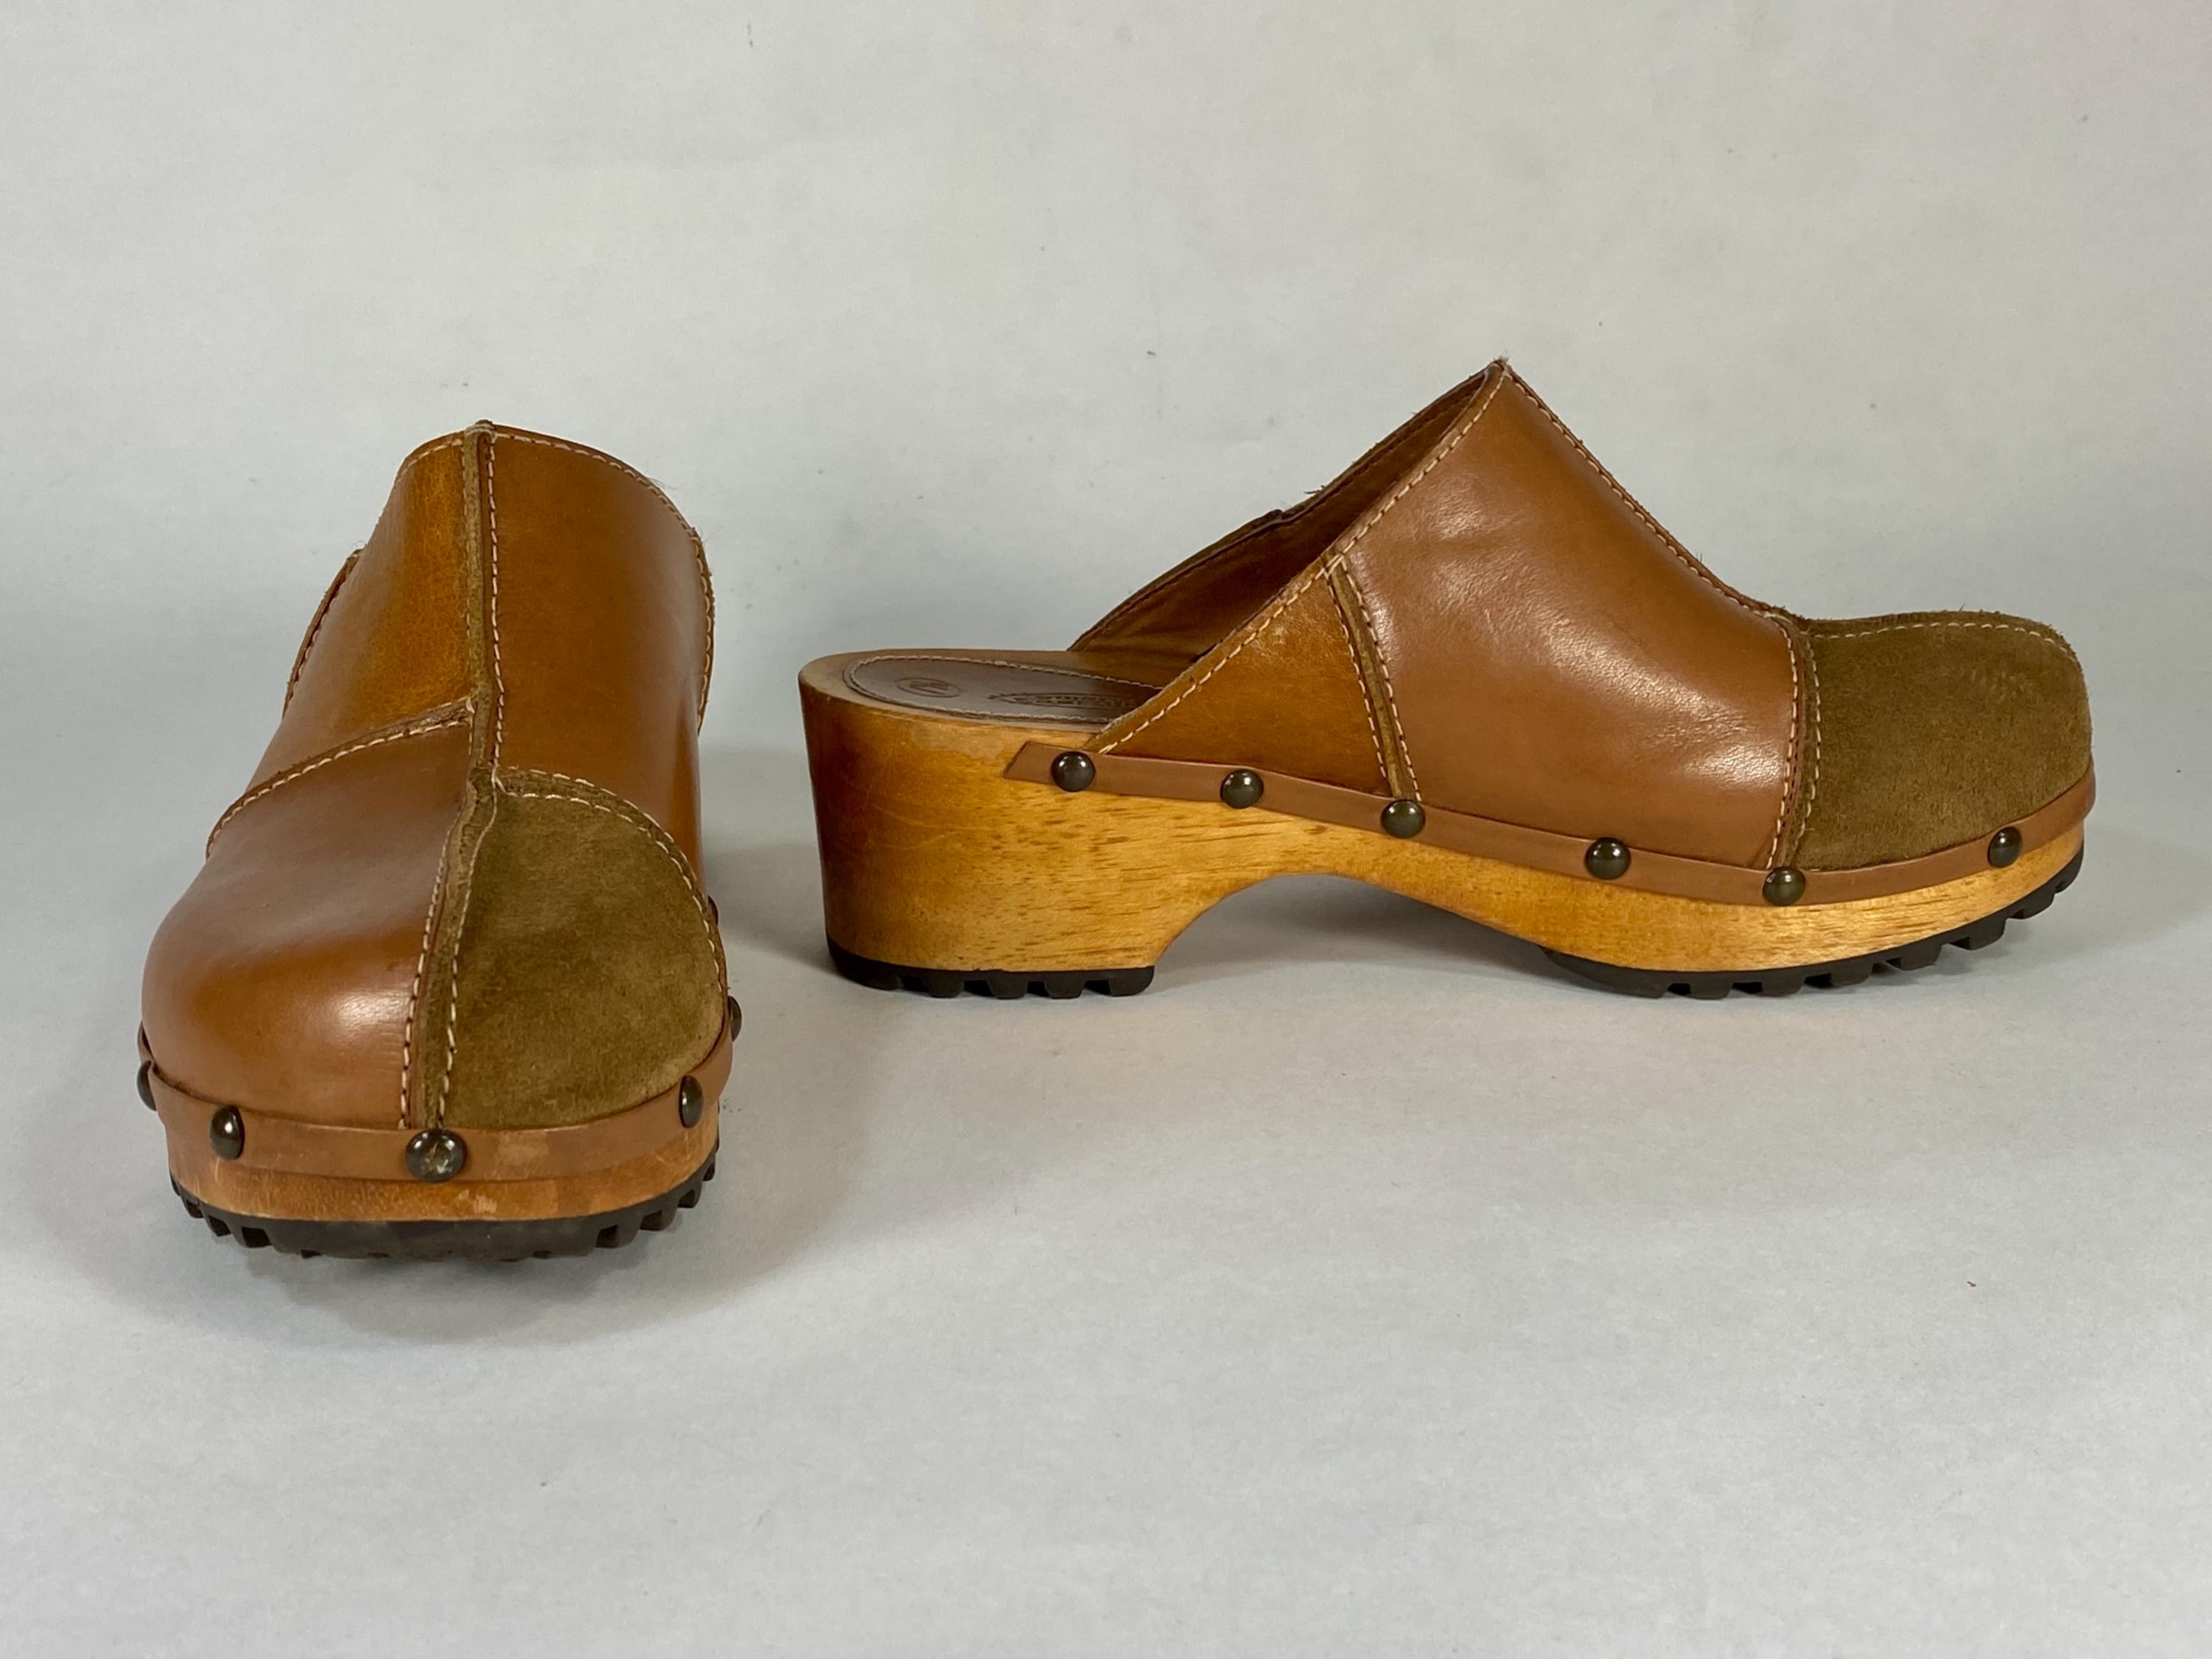 Vintage 90’s/00’s Brown Leather Patchwork Clogs by Lower East Side ...